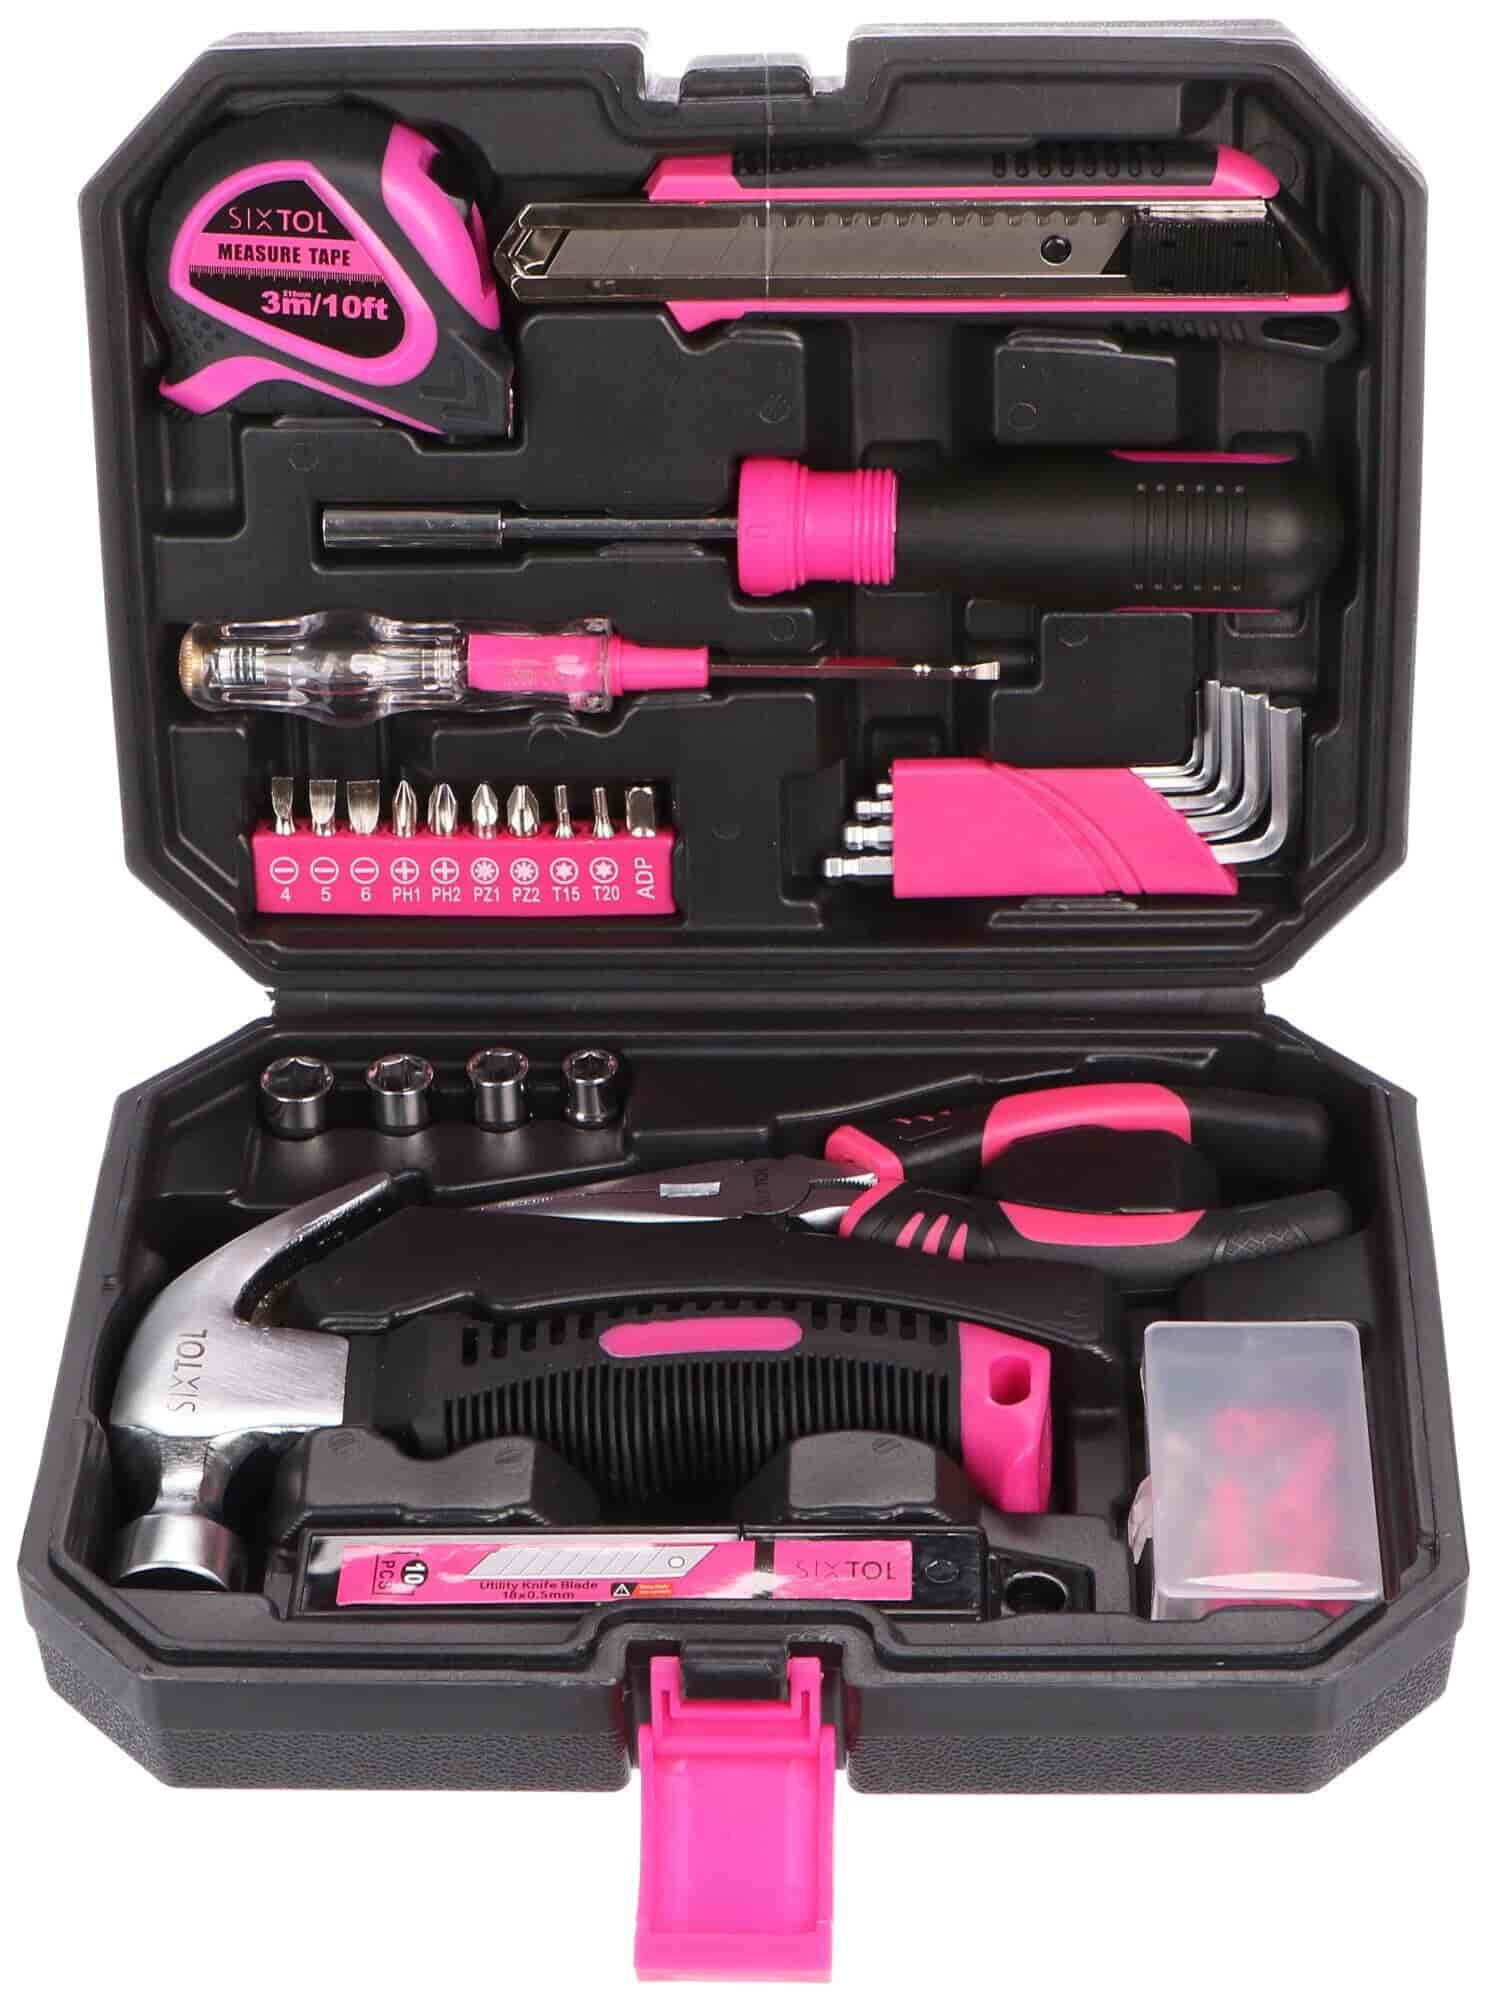 Toolset HOME PINK 66Practical pink/pink tool set SIXTOL HOME PINK 66 is a good helper in the home. The set contained the most used tools, with which you can easily and quickly repair anything. The SIXTOL HOME PINK 66 tool set consists of tools such as pliers, Allen keys, a hammer and much more. A lot of useful little accessories are also included. The tool is stored in a compact, practical black-pink case.N.A.